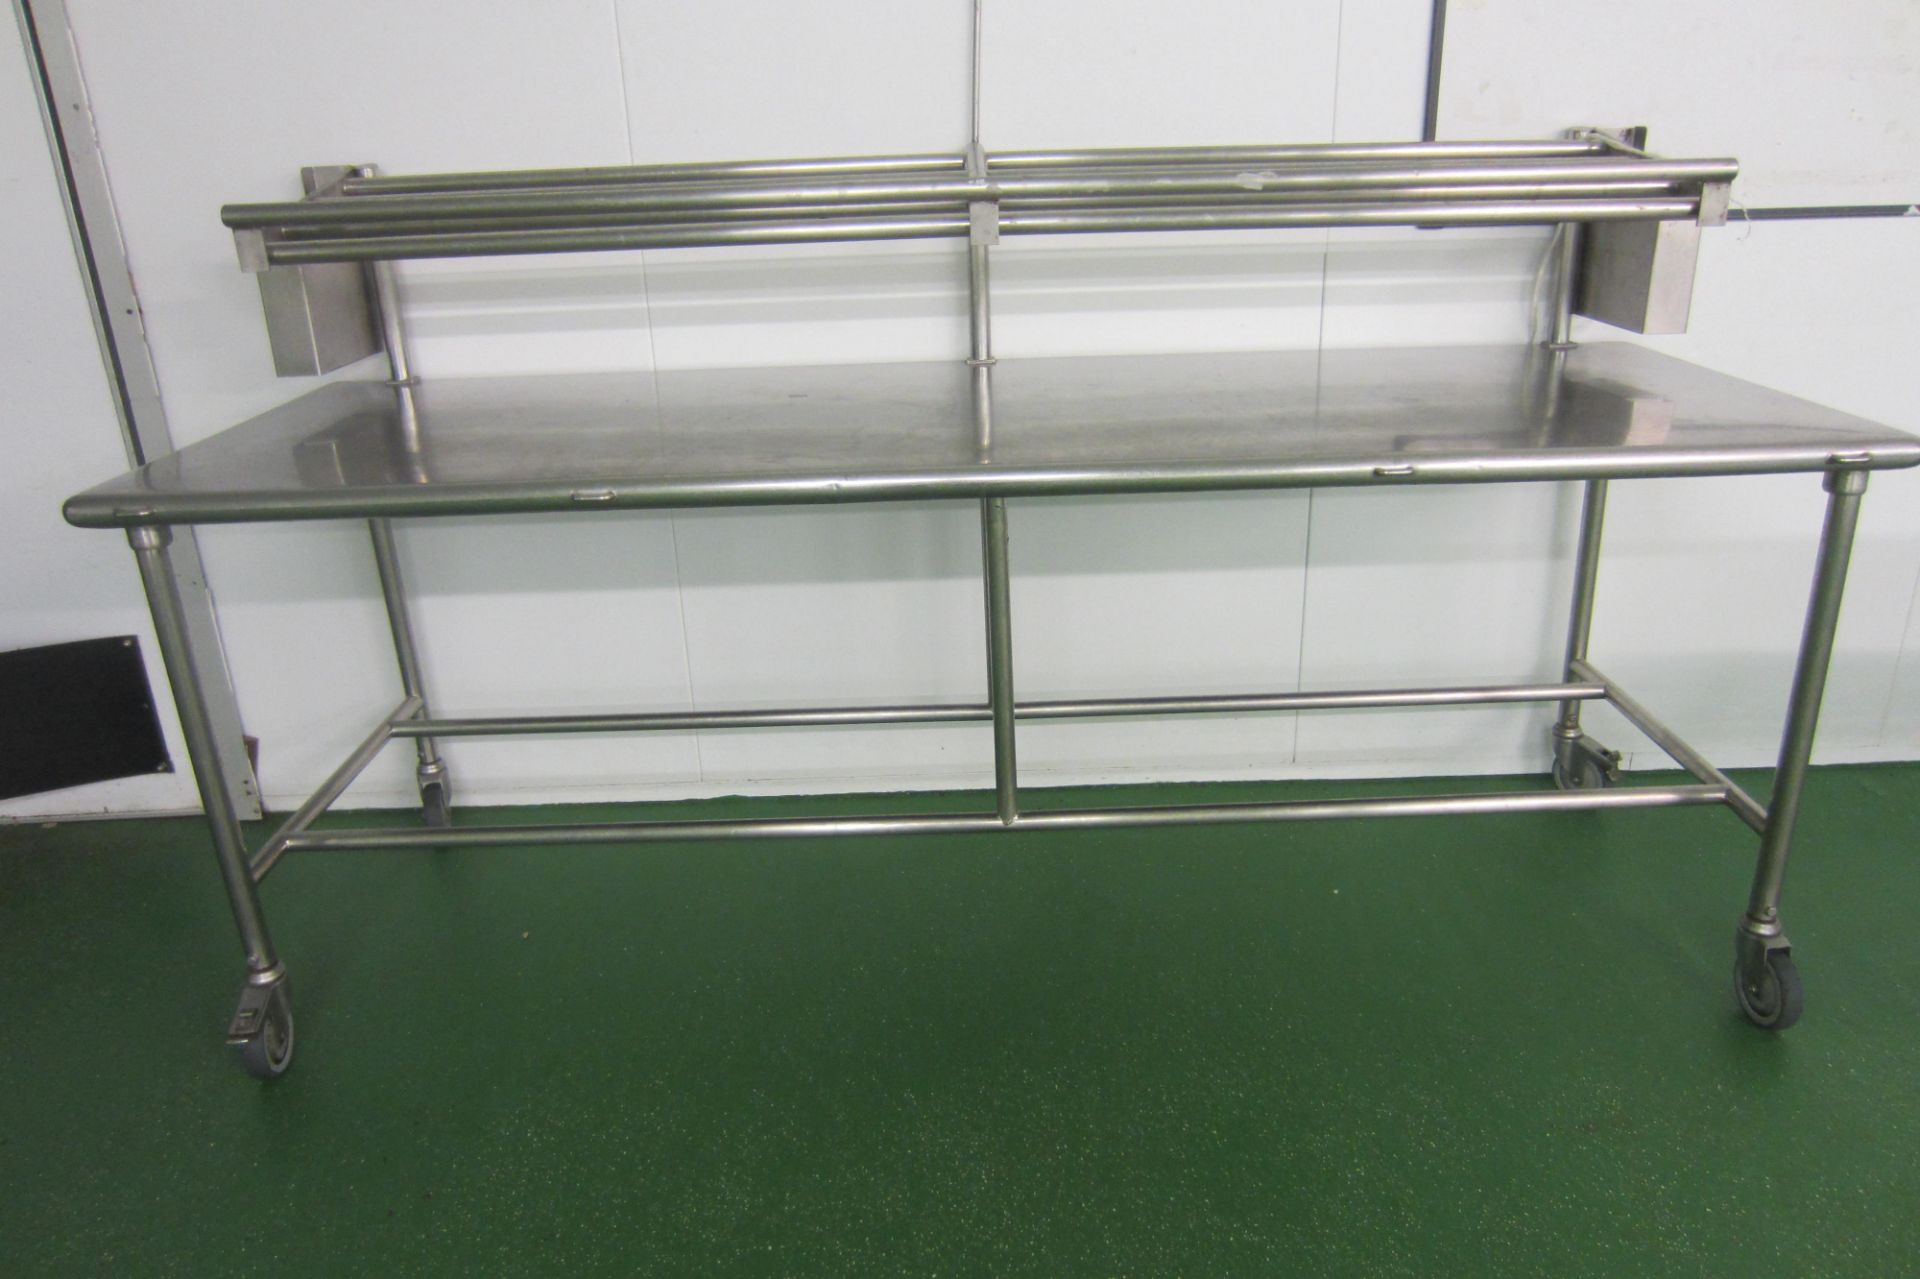 Stainless Steel Table with Rack Over. Size 234cm x 82cm